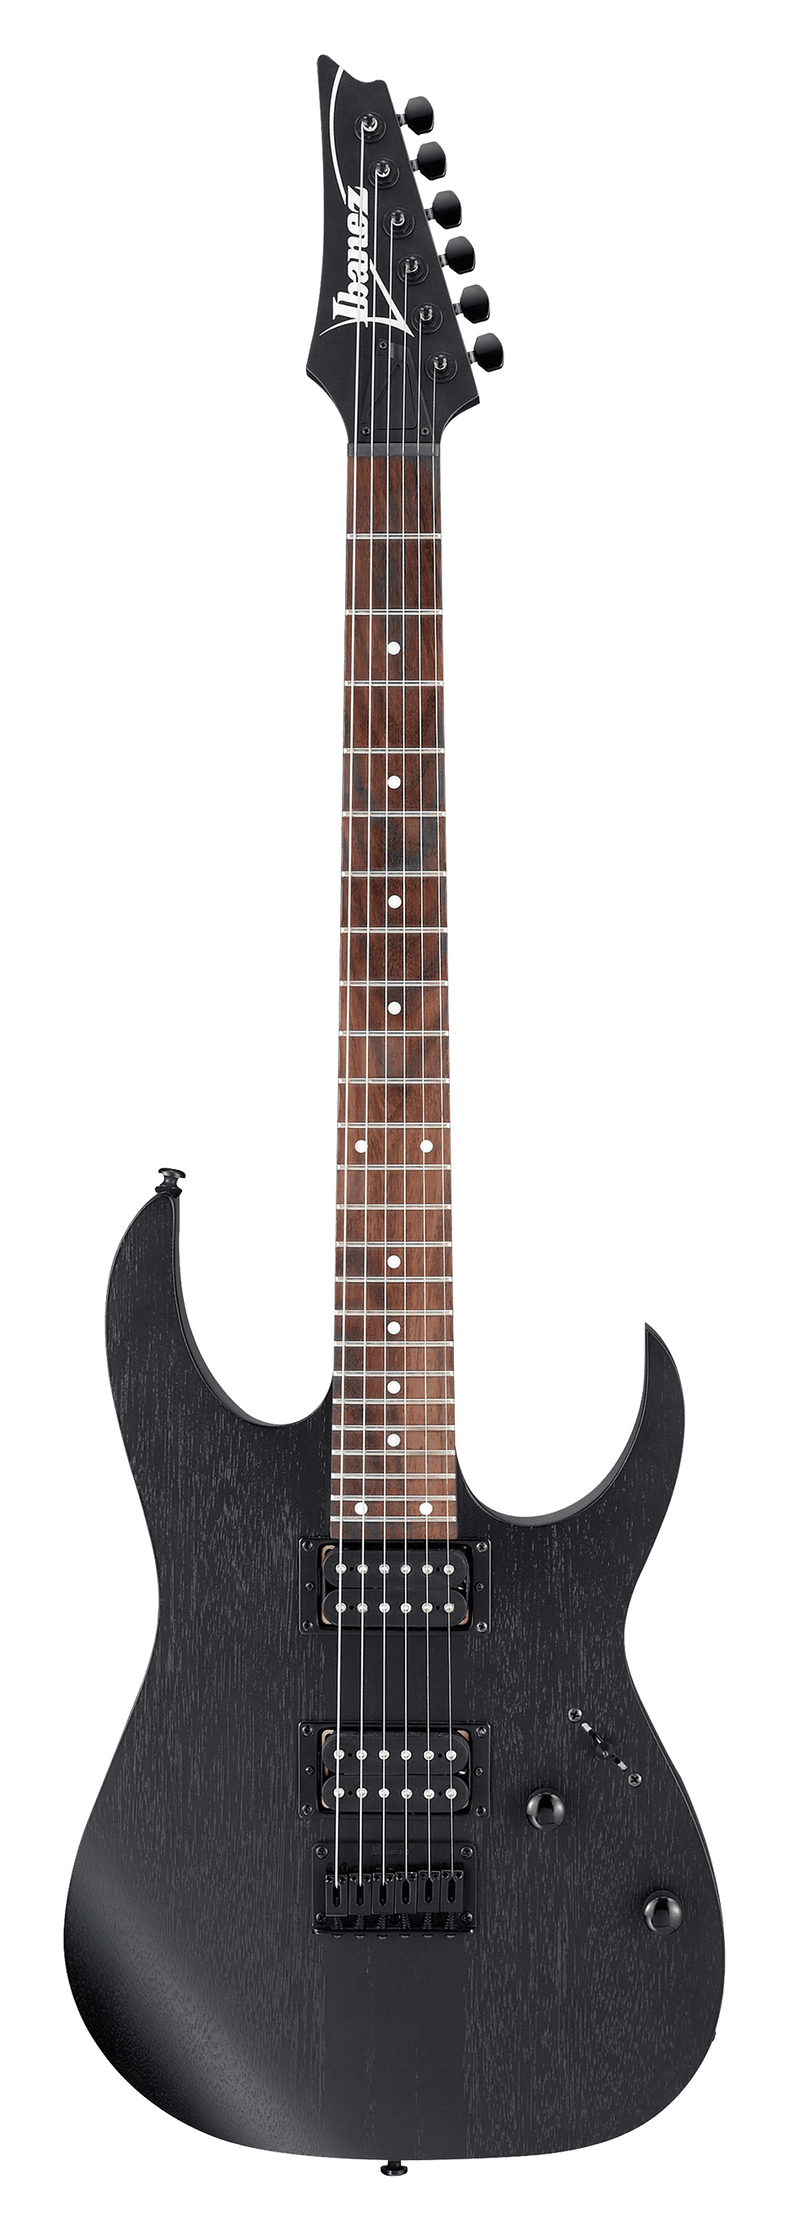 Ibanez RGRT421 Electric Guitar (Weathered Black)